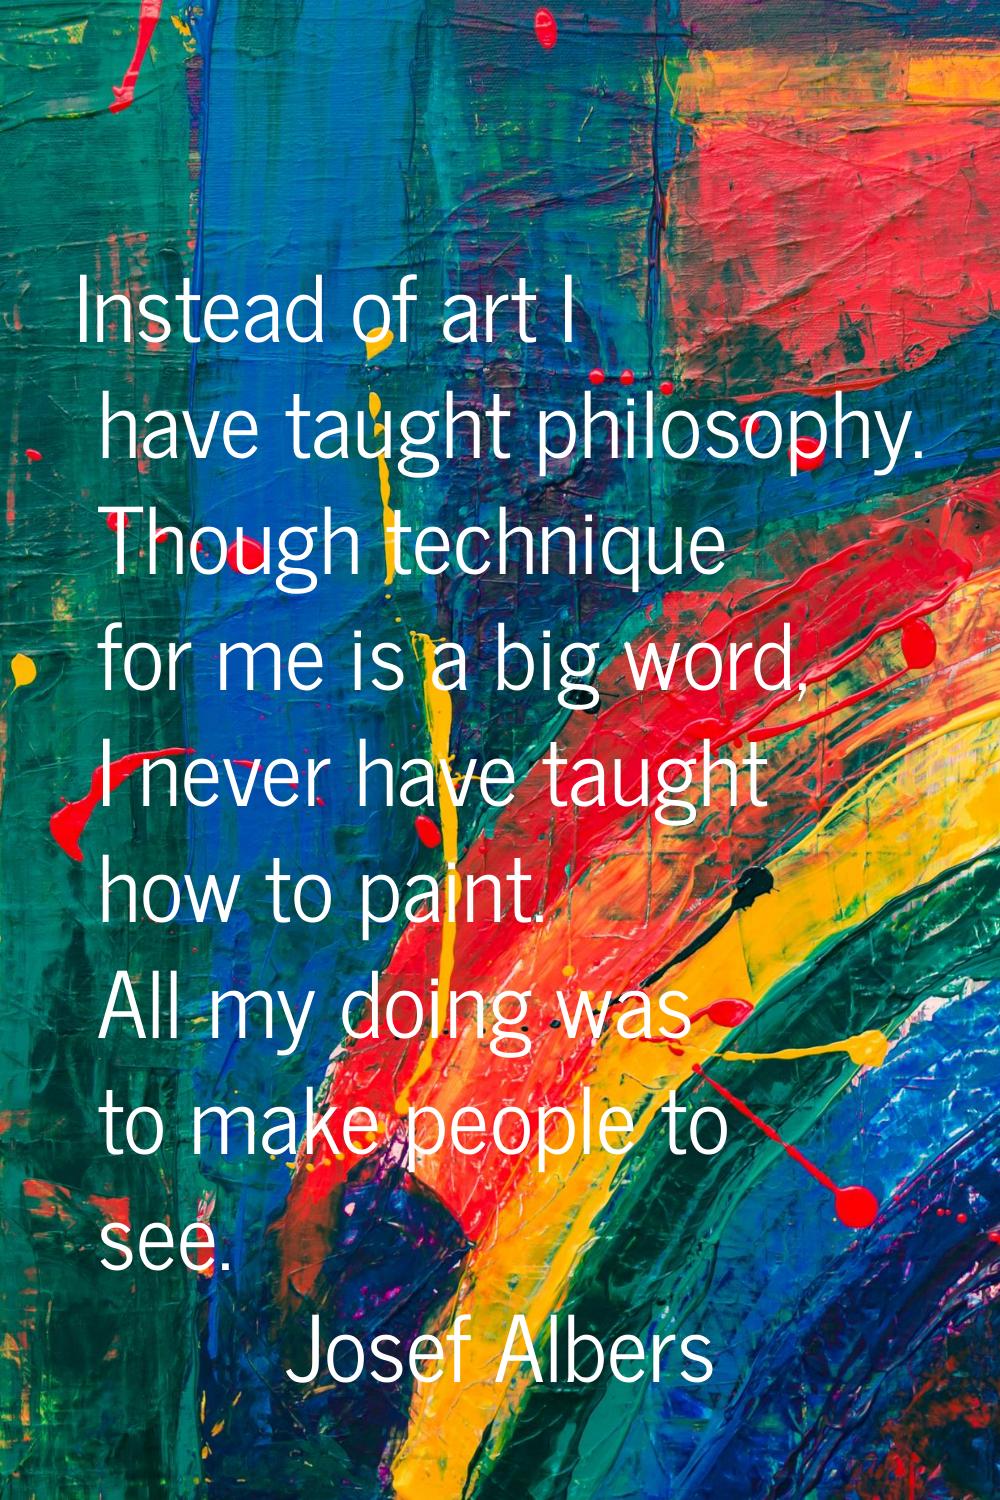 Instead of art I have taught philosophy. Though technique for me is a big word, I never have taught